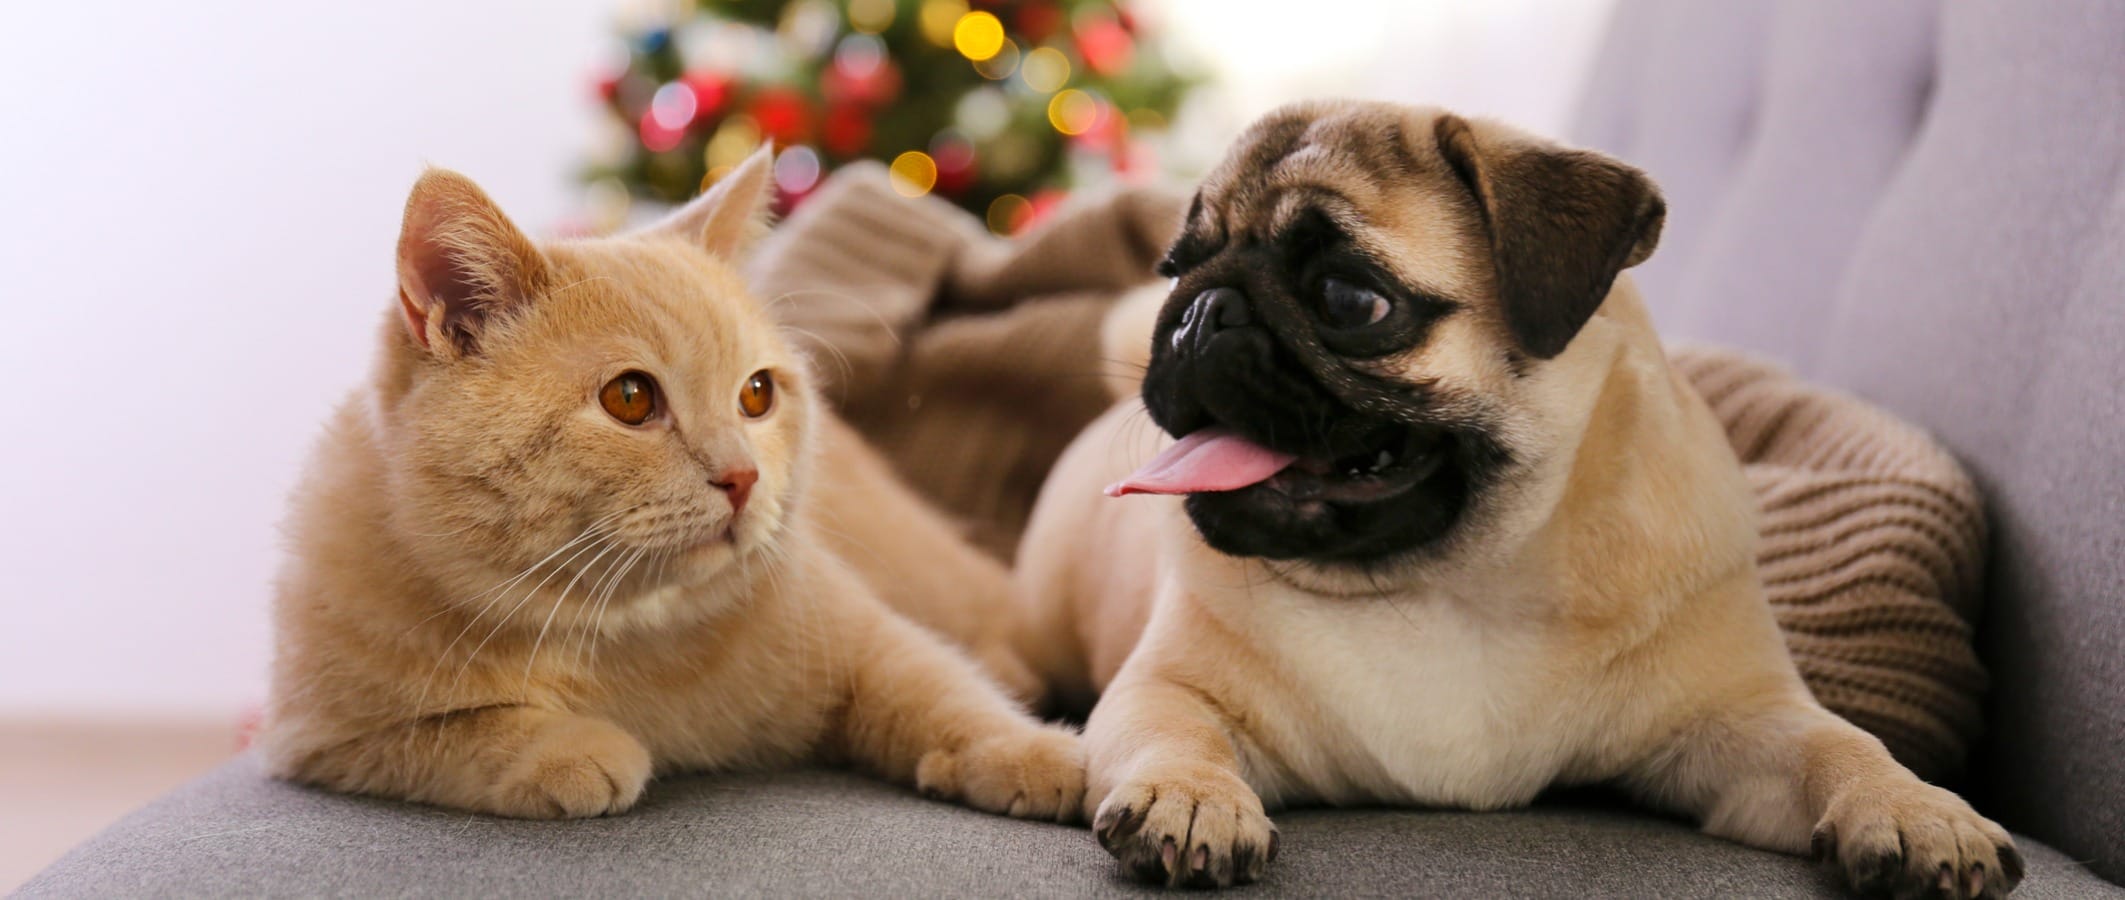 orange cat and pug on the couch with christmas tree in background